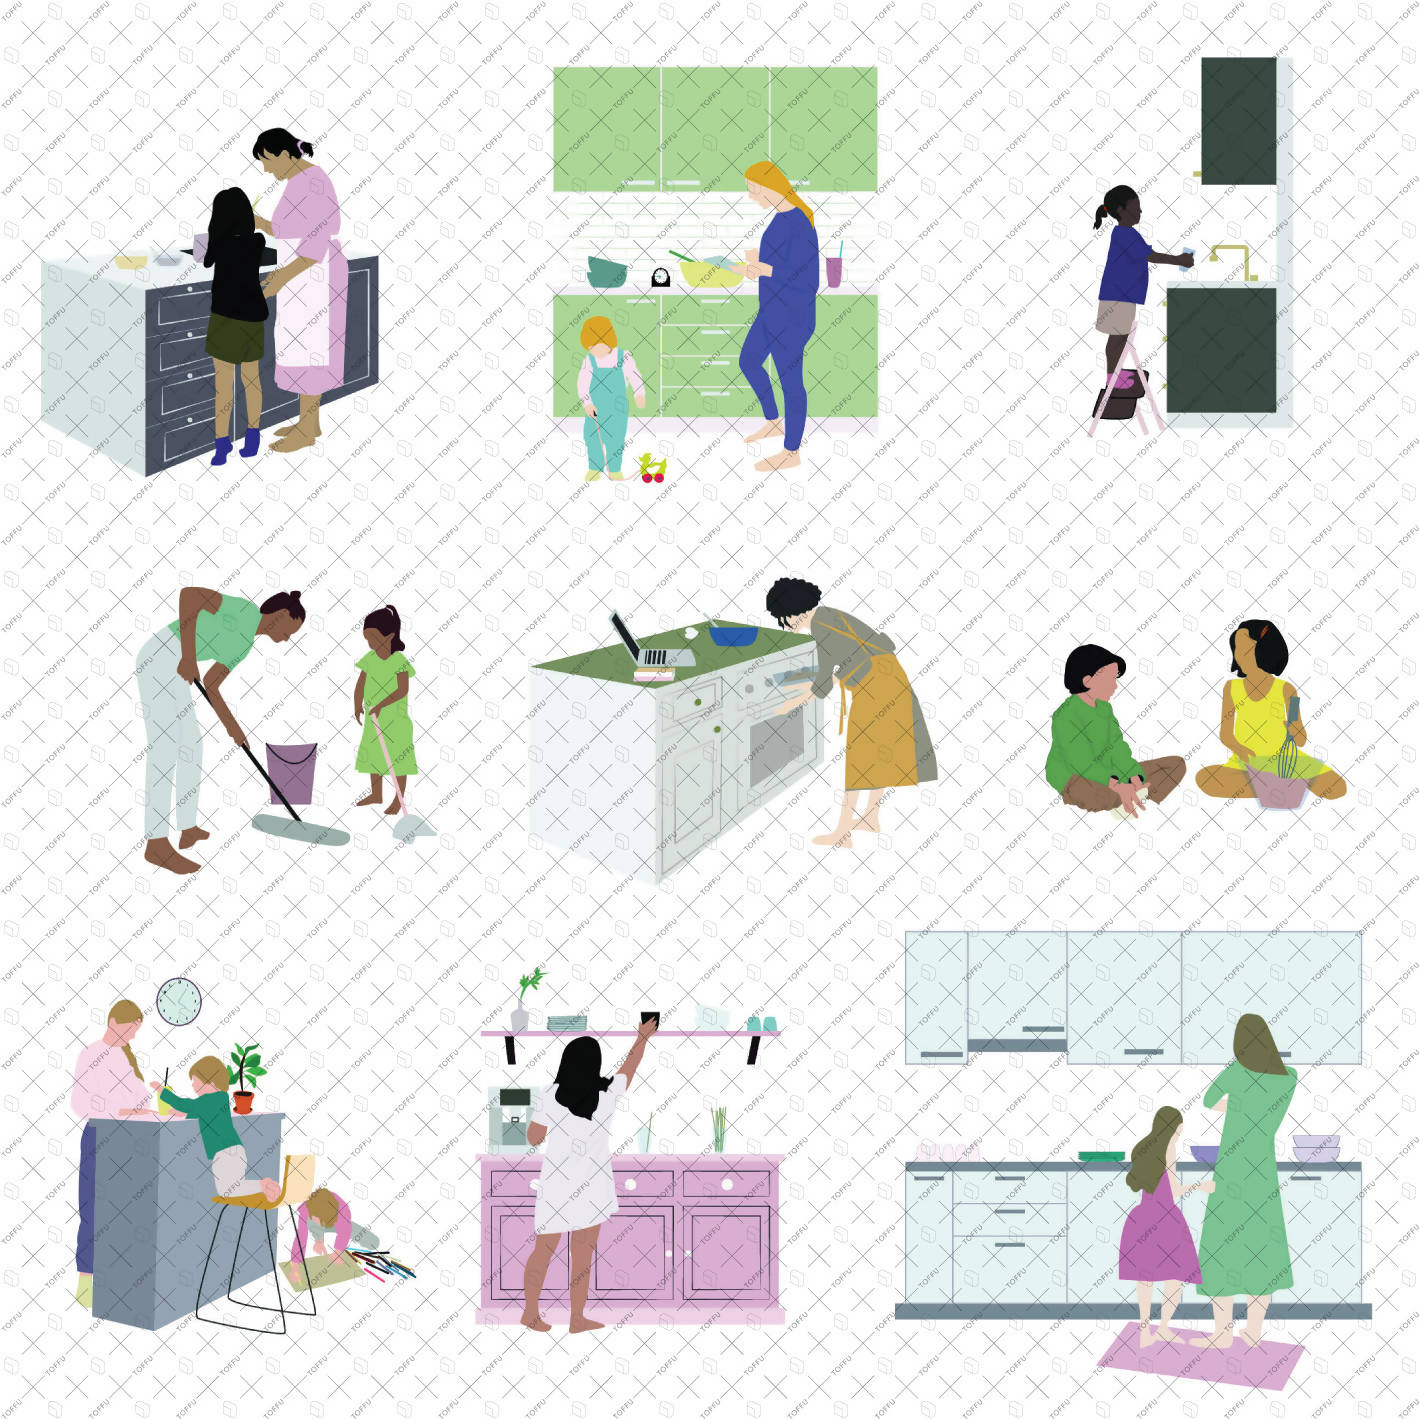 kids cleaning kitchen clipart